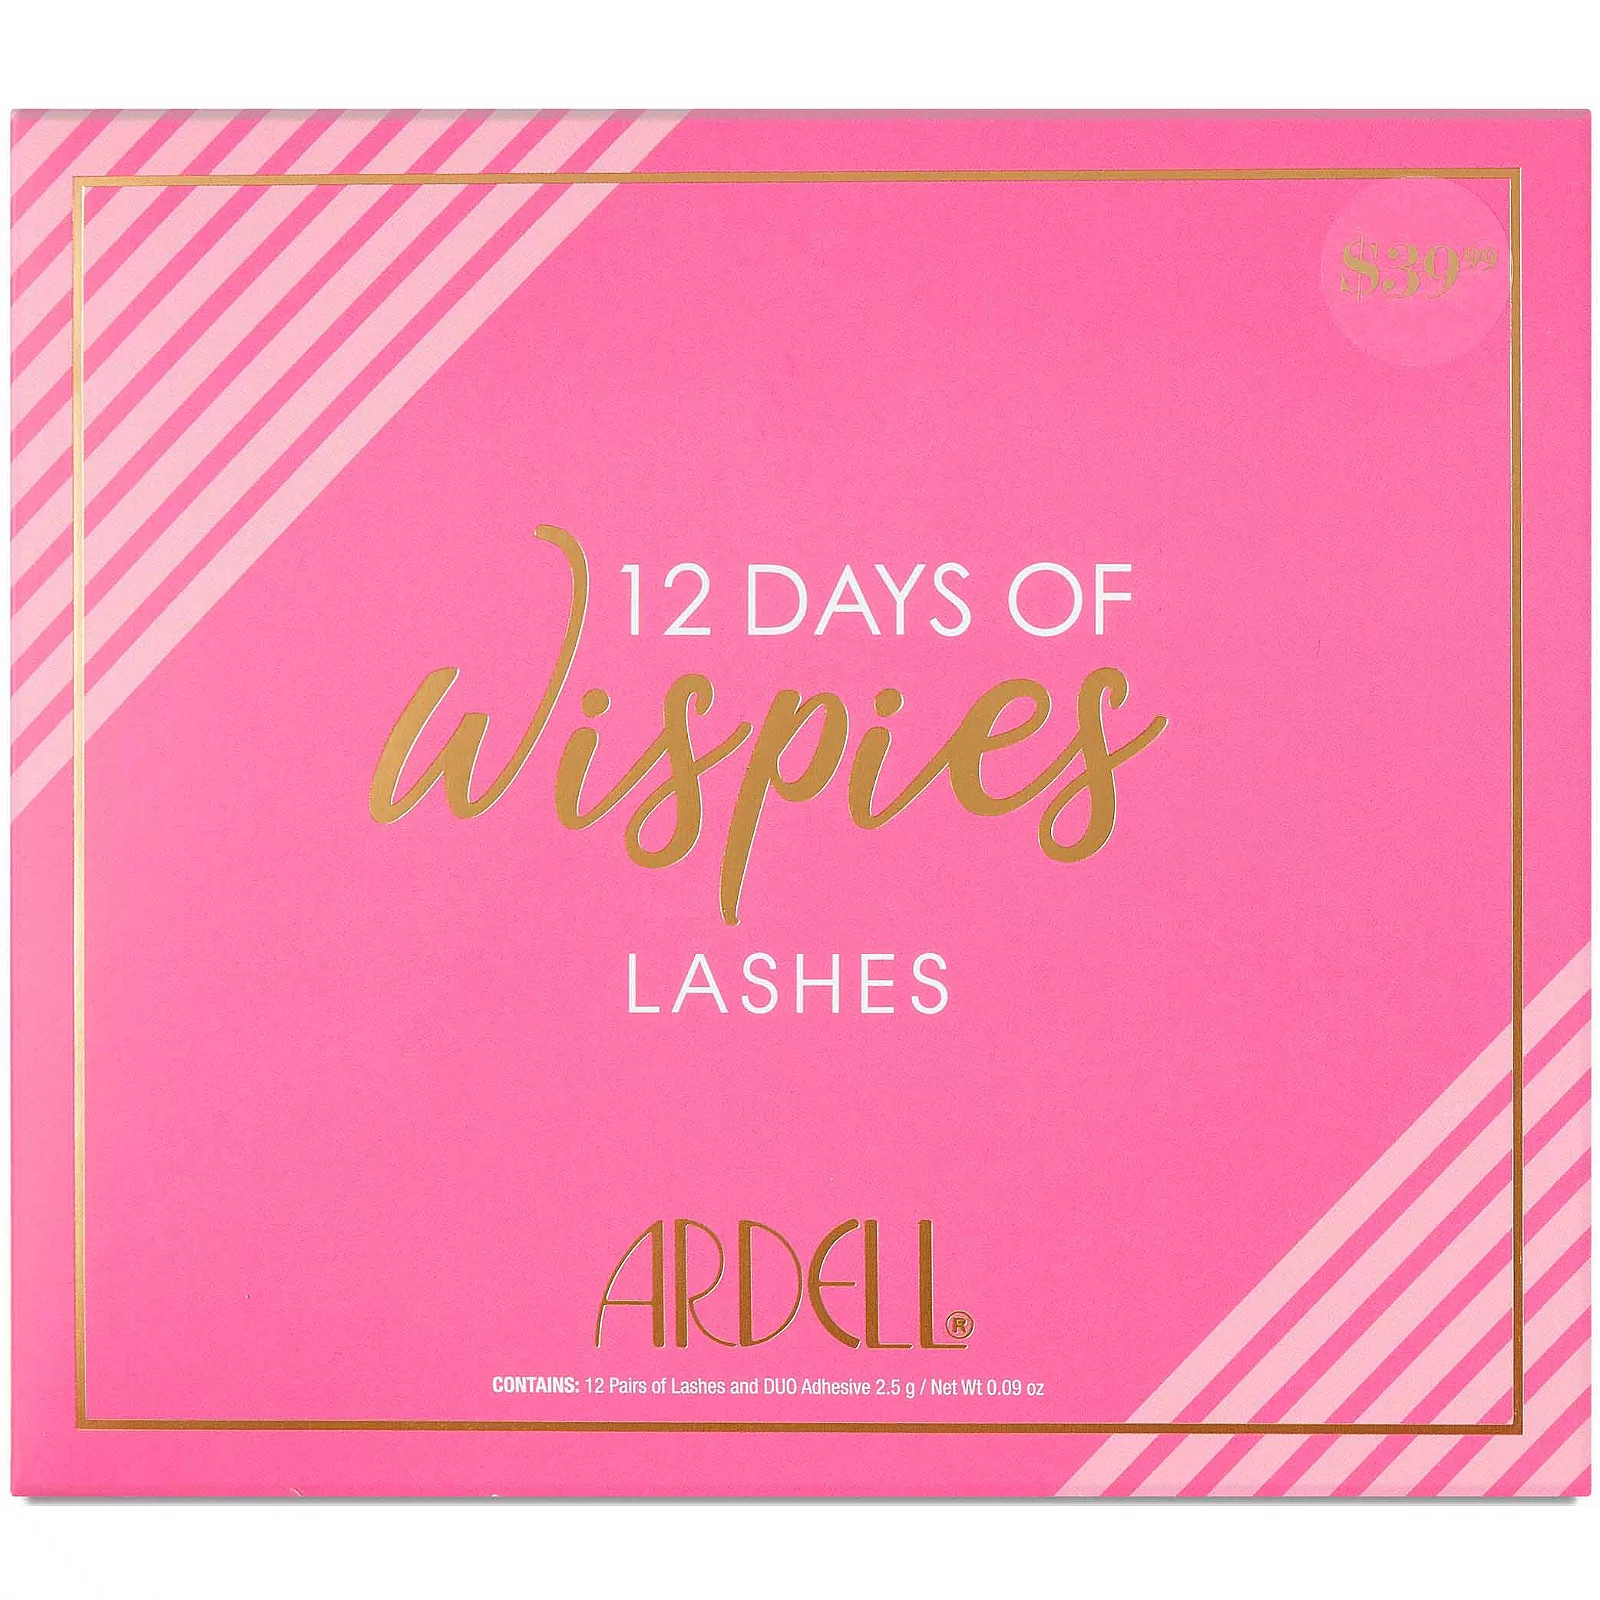 2020 Ardell Lash Advent Calendar Available Now + Full Spoilers! Hello